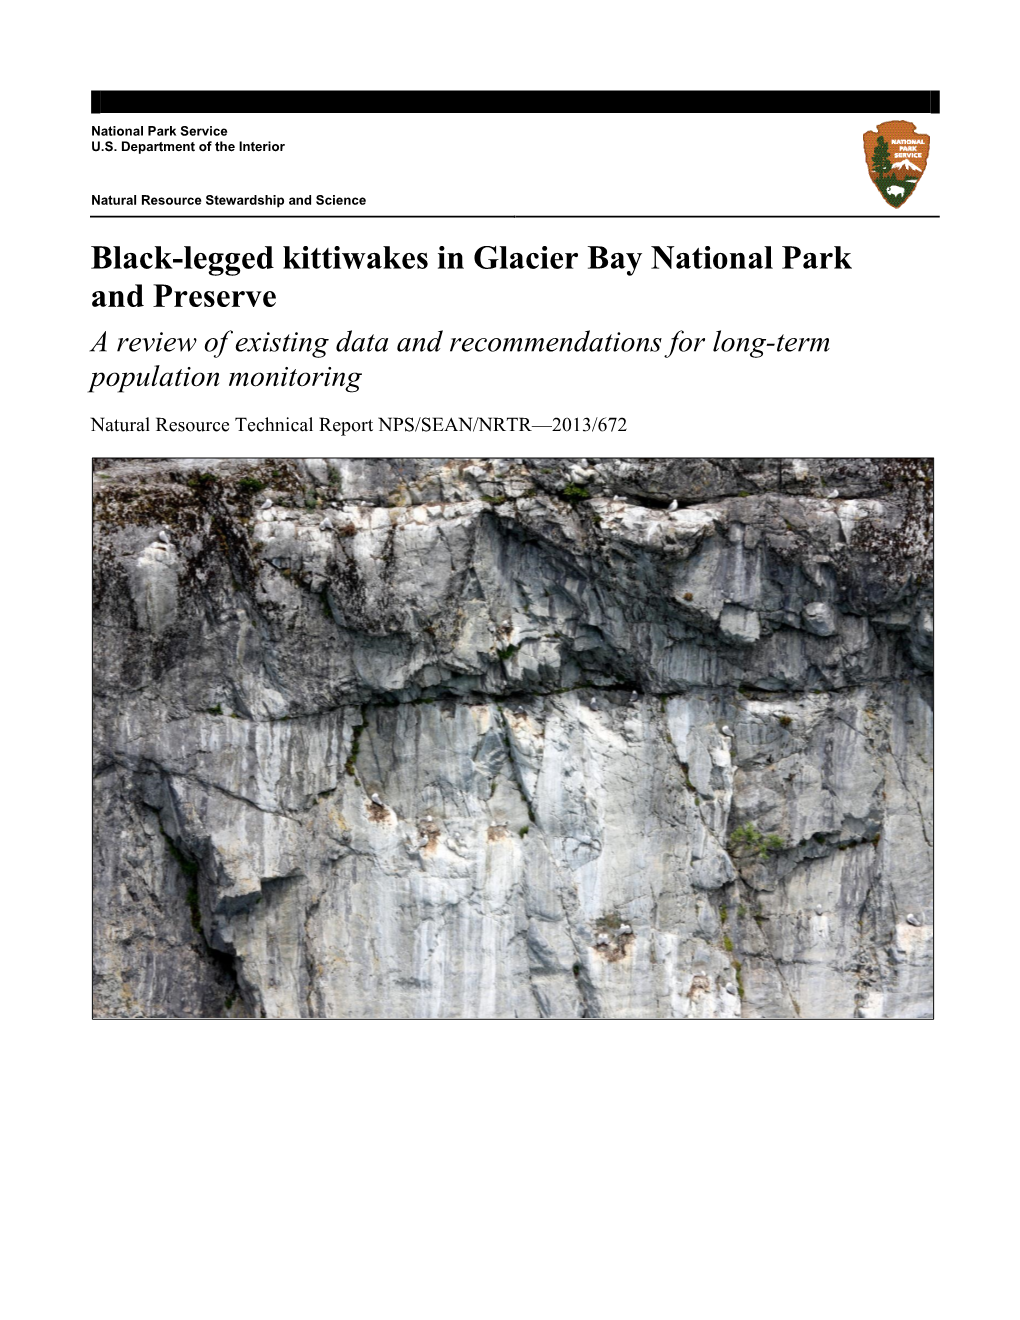 Black-Legged Kittiwakes in Glacier Bay National Park and Preserve a Review of Existing Data and Recommendations for Long-Term Population Monitoring